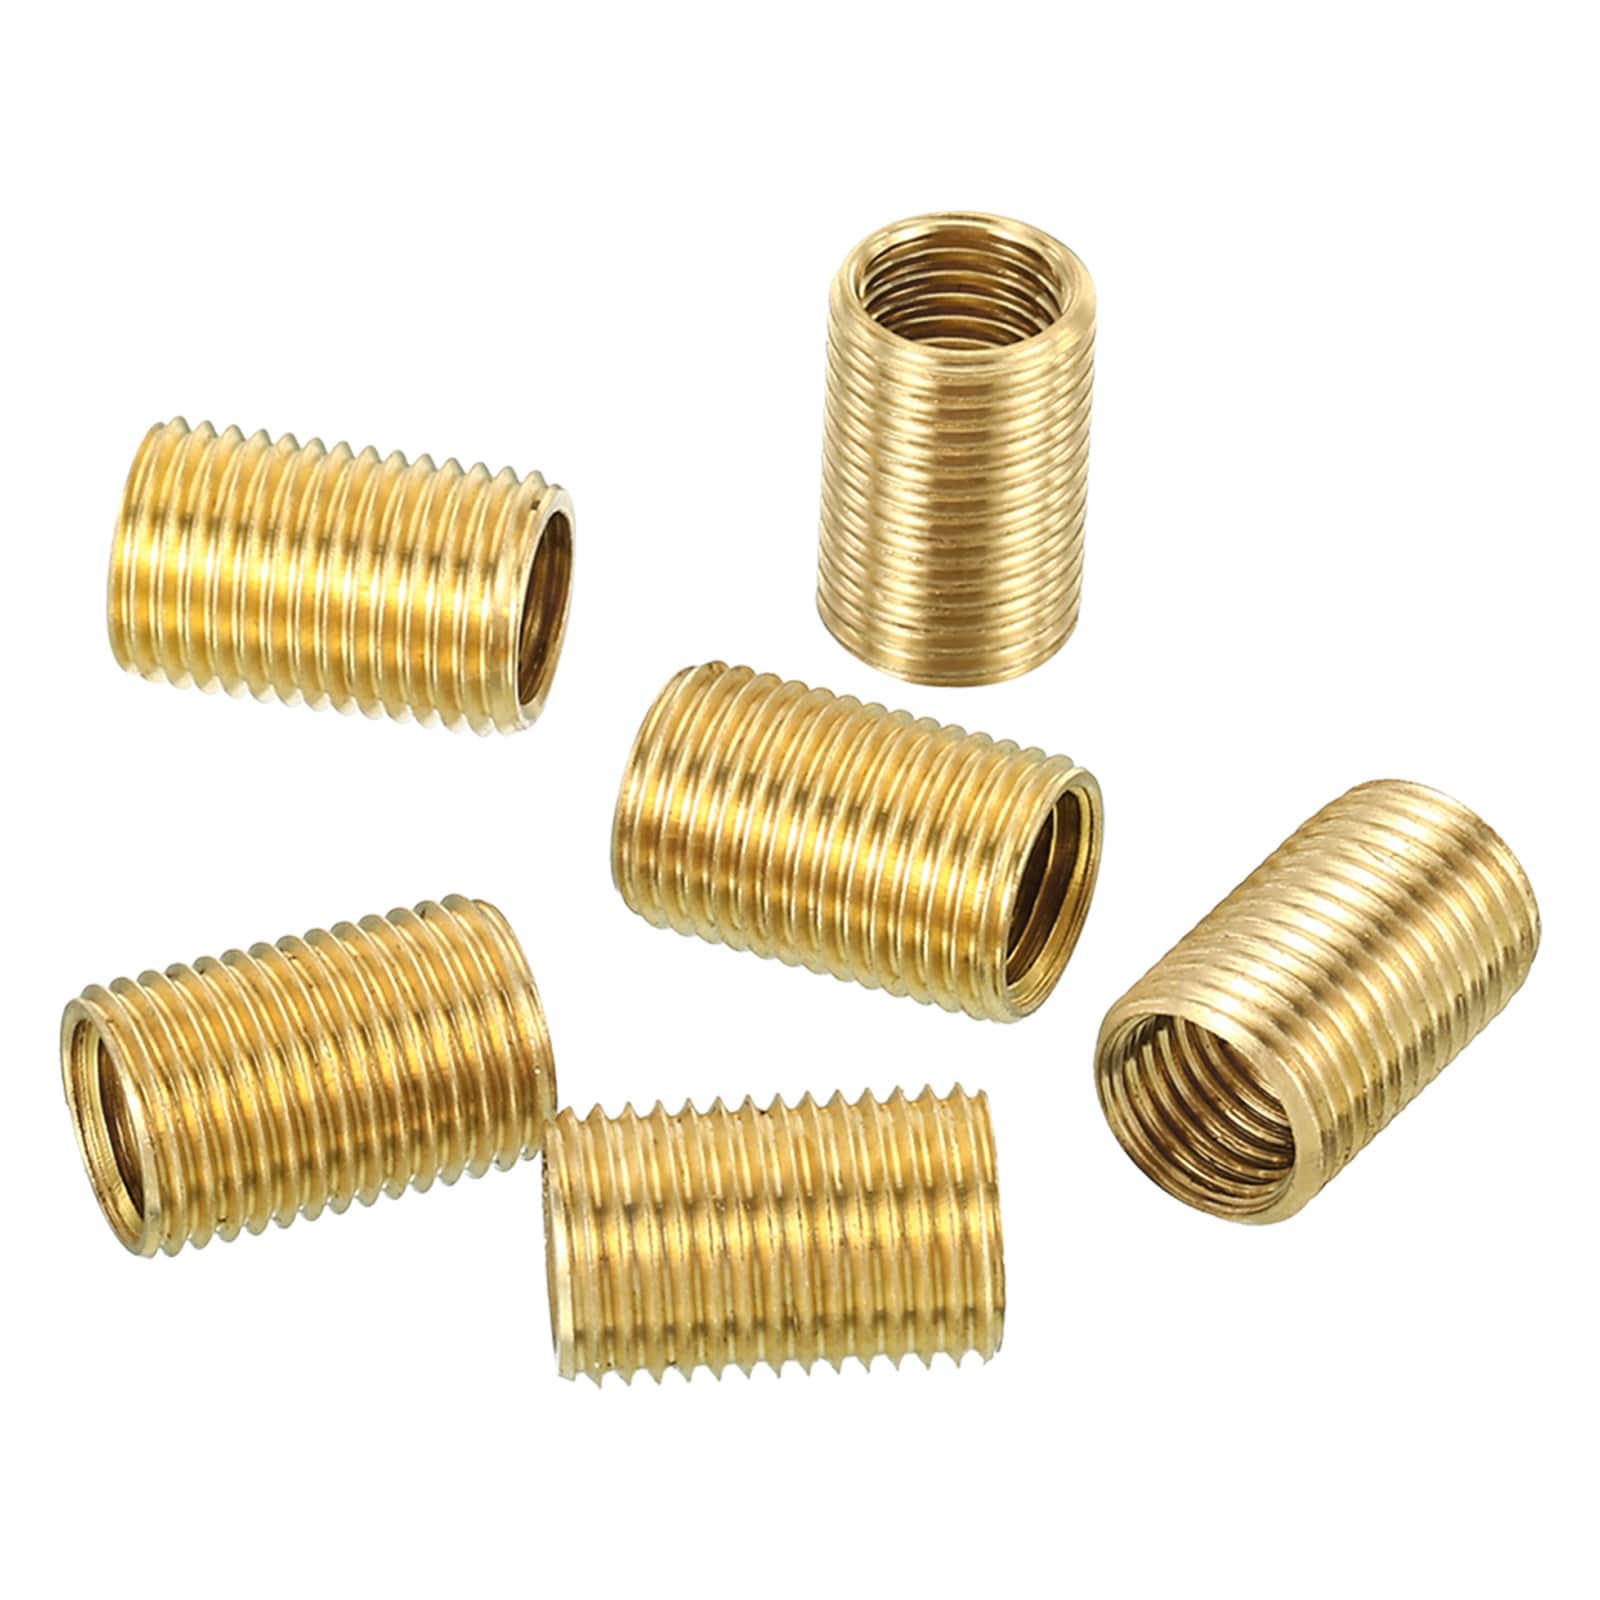 M12/M14 to M10 Thread Adapters Sleeve Reducing Nut 15mm Screw Coupler - Bed  Bath & Beyond - 37211896